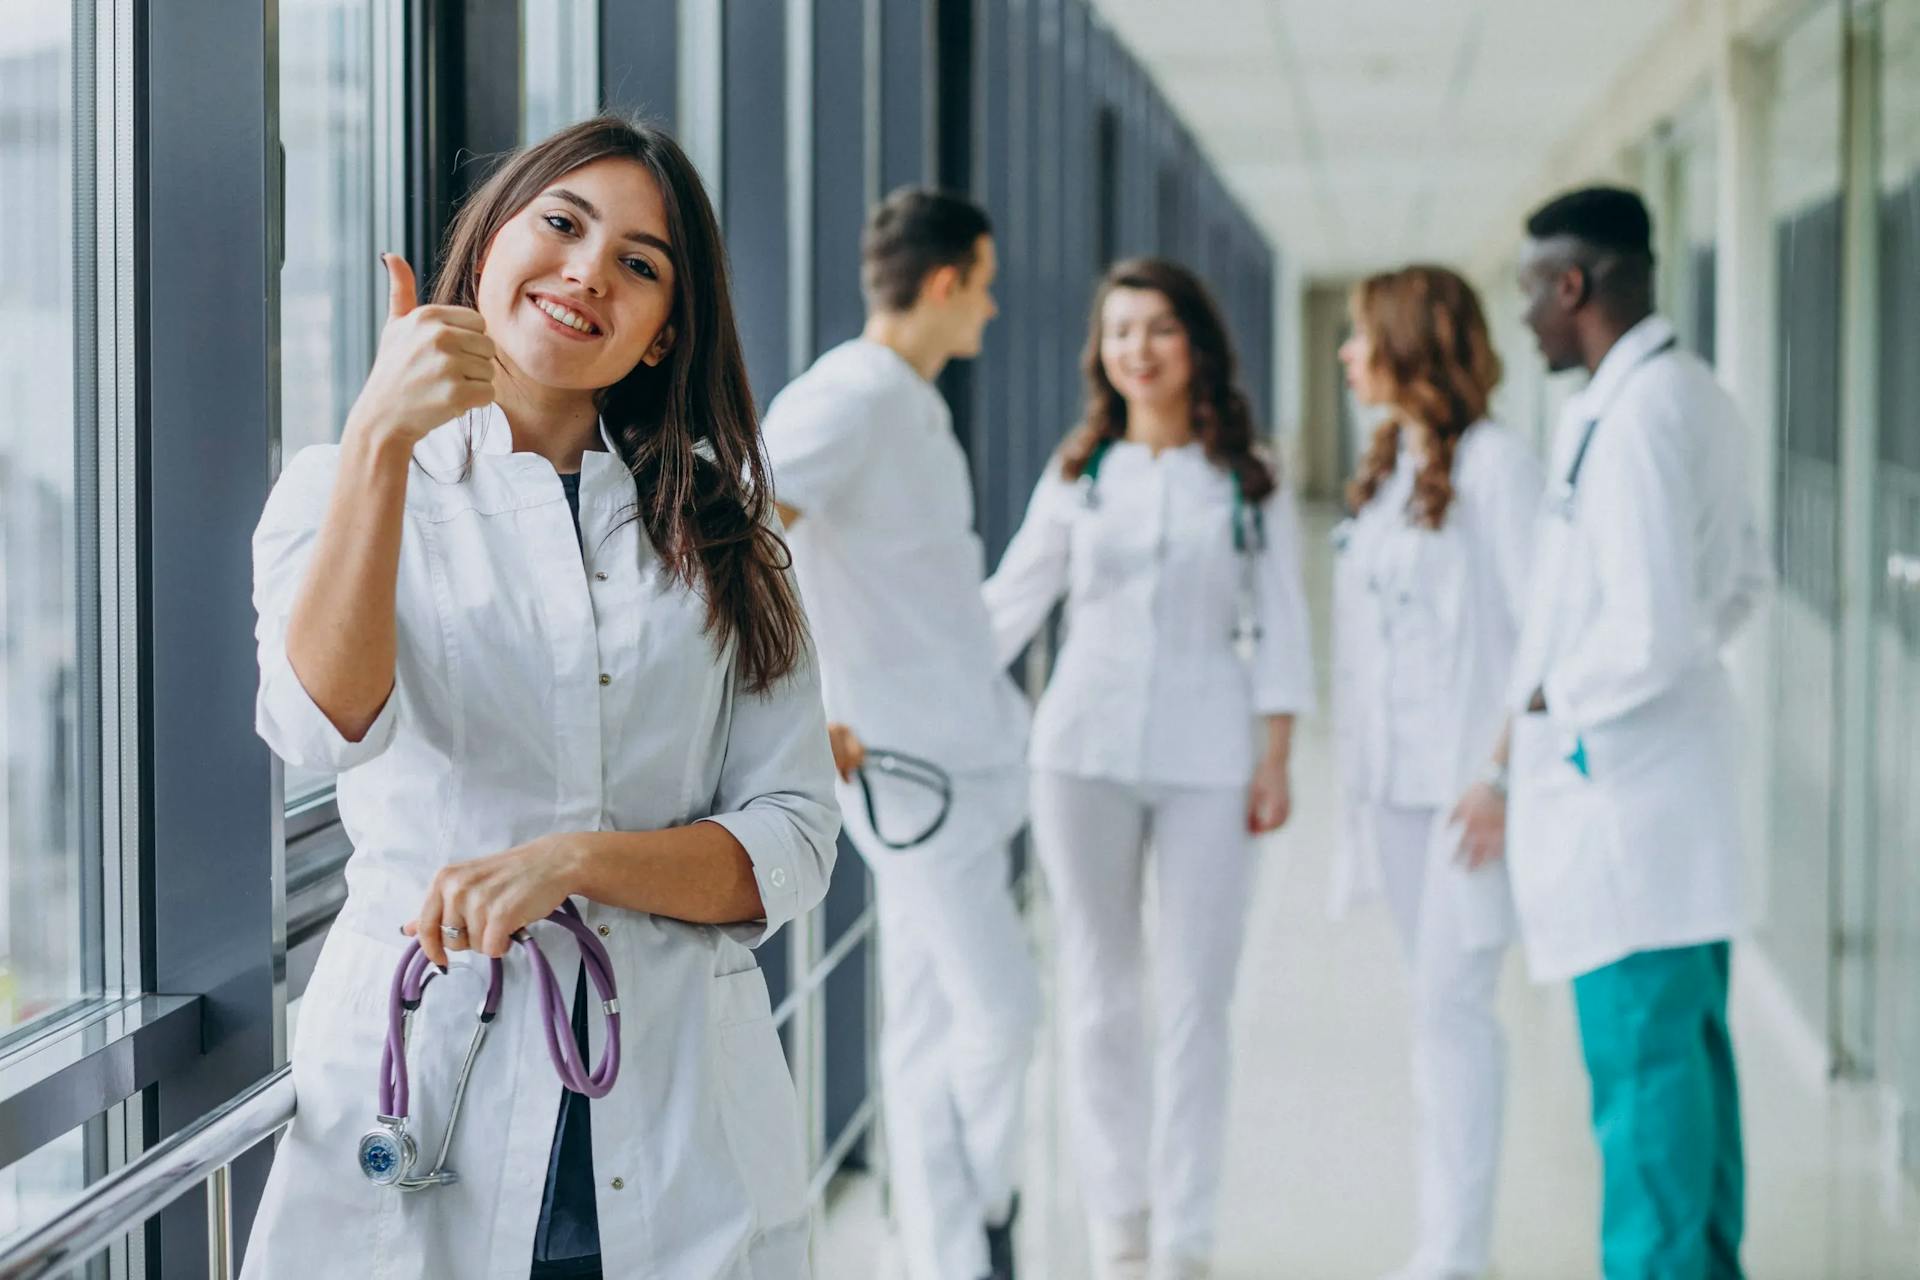 https://strapiassetsprod.s3.amazonaws.com/young_female_doctor_with_thumbs_up_gesture_standing_corridor_hospital_11zon_85b1185007.webp